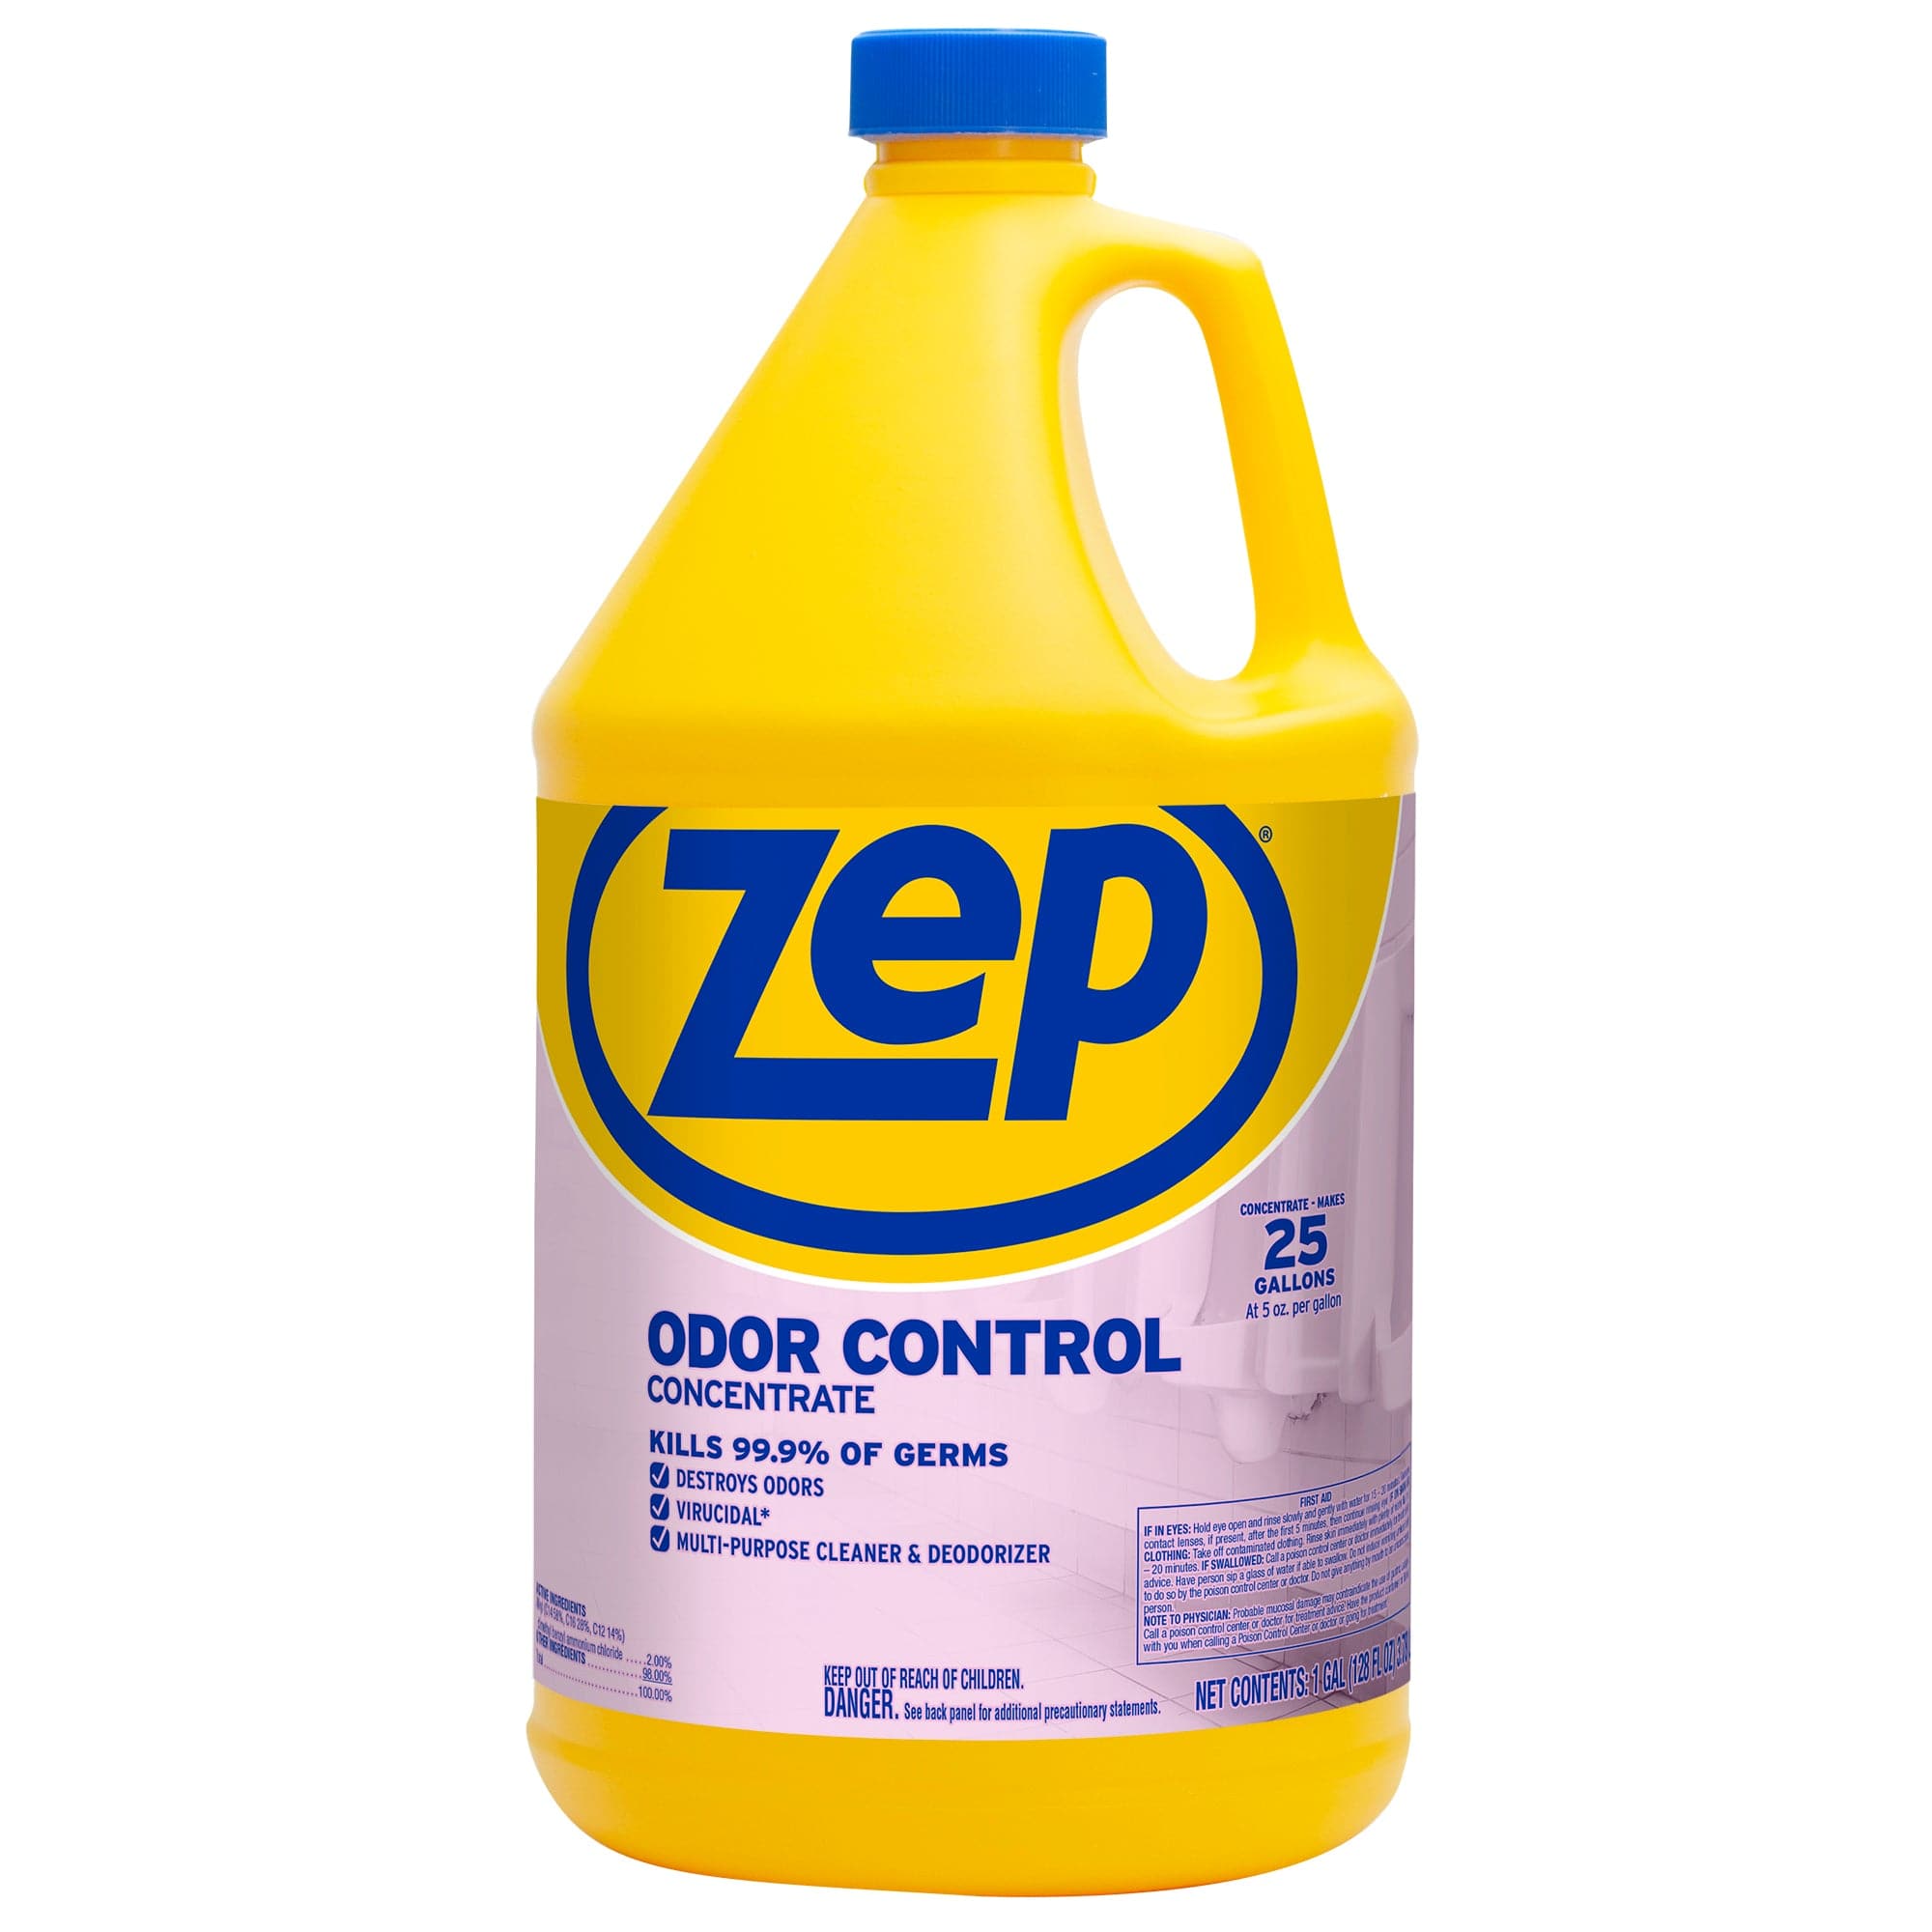 Odor Control and Disinfection